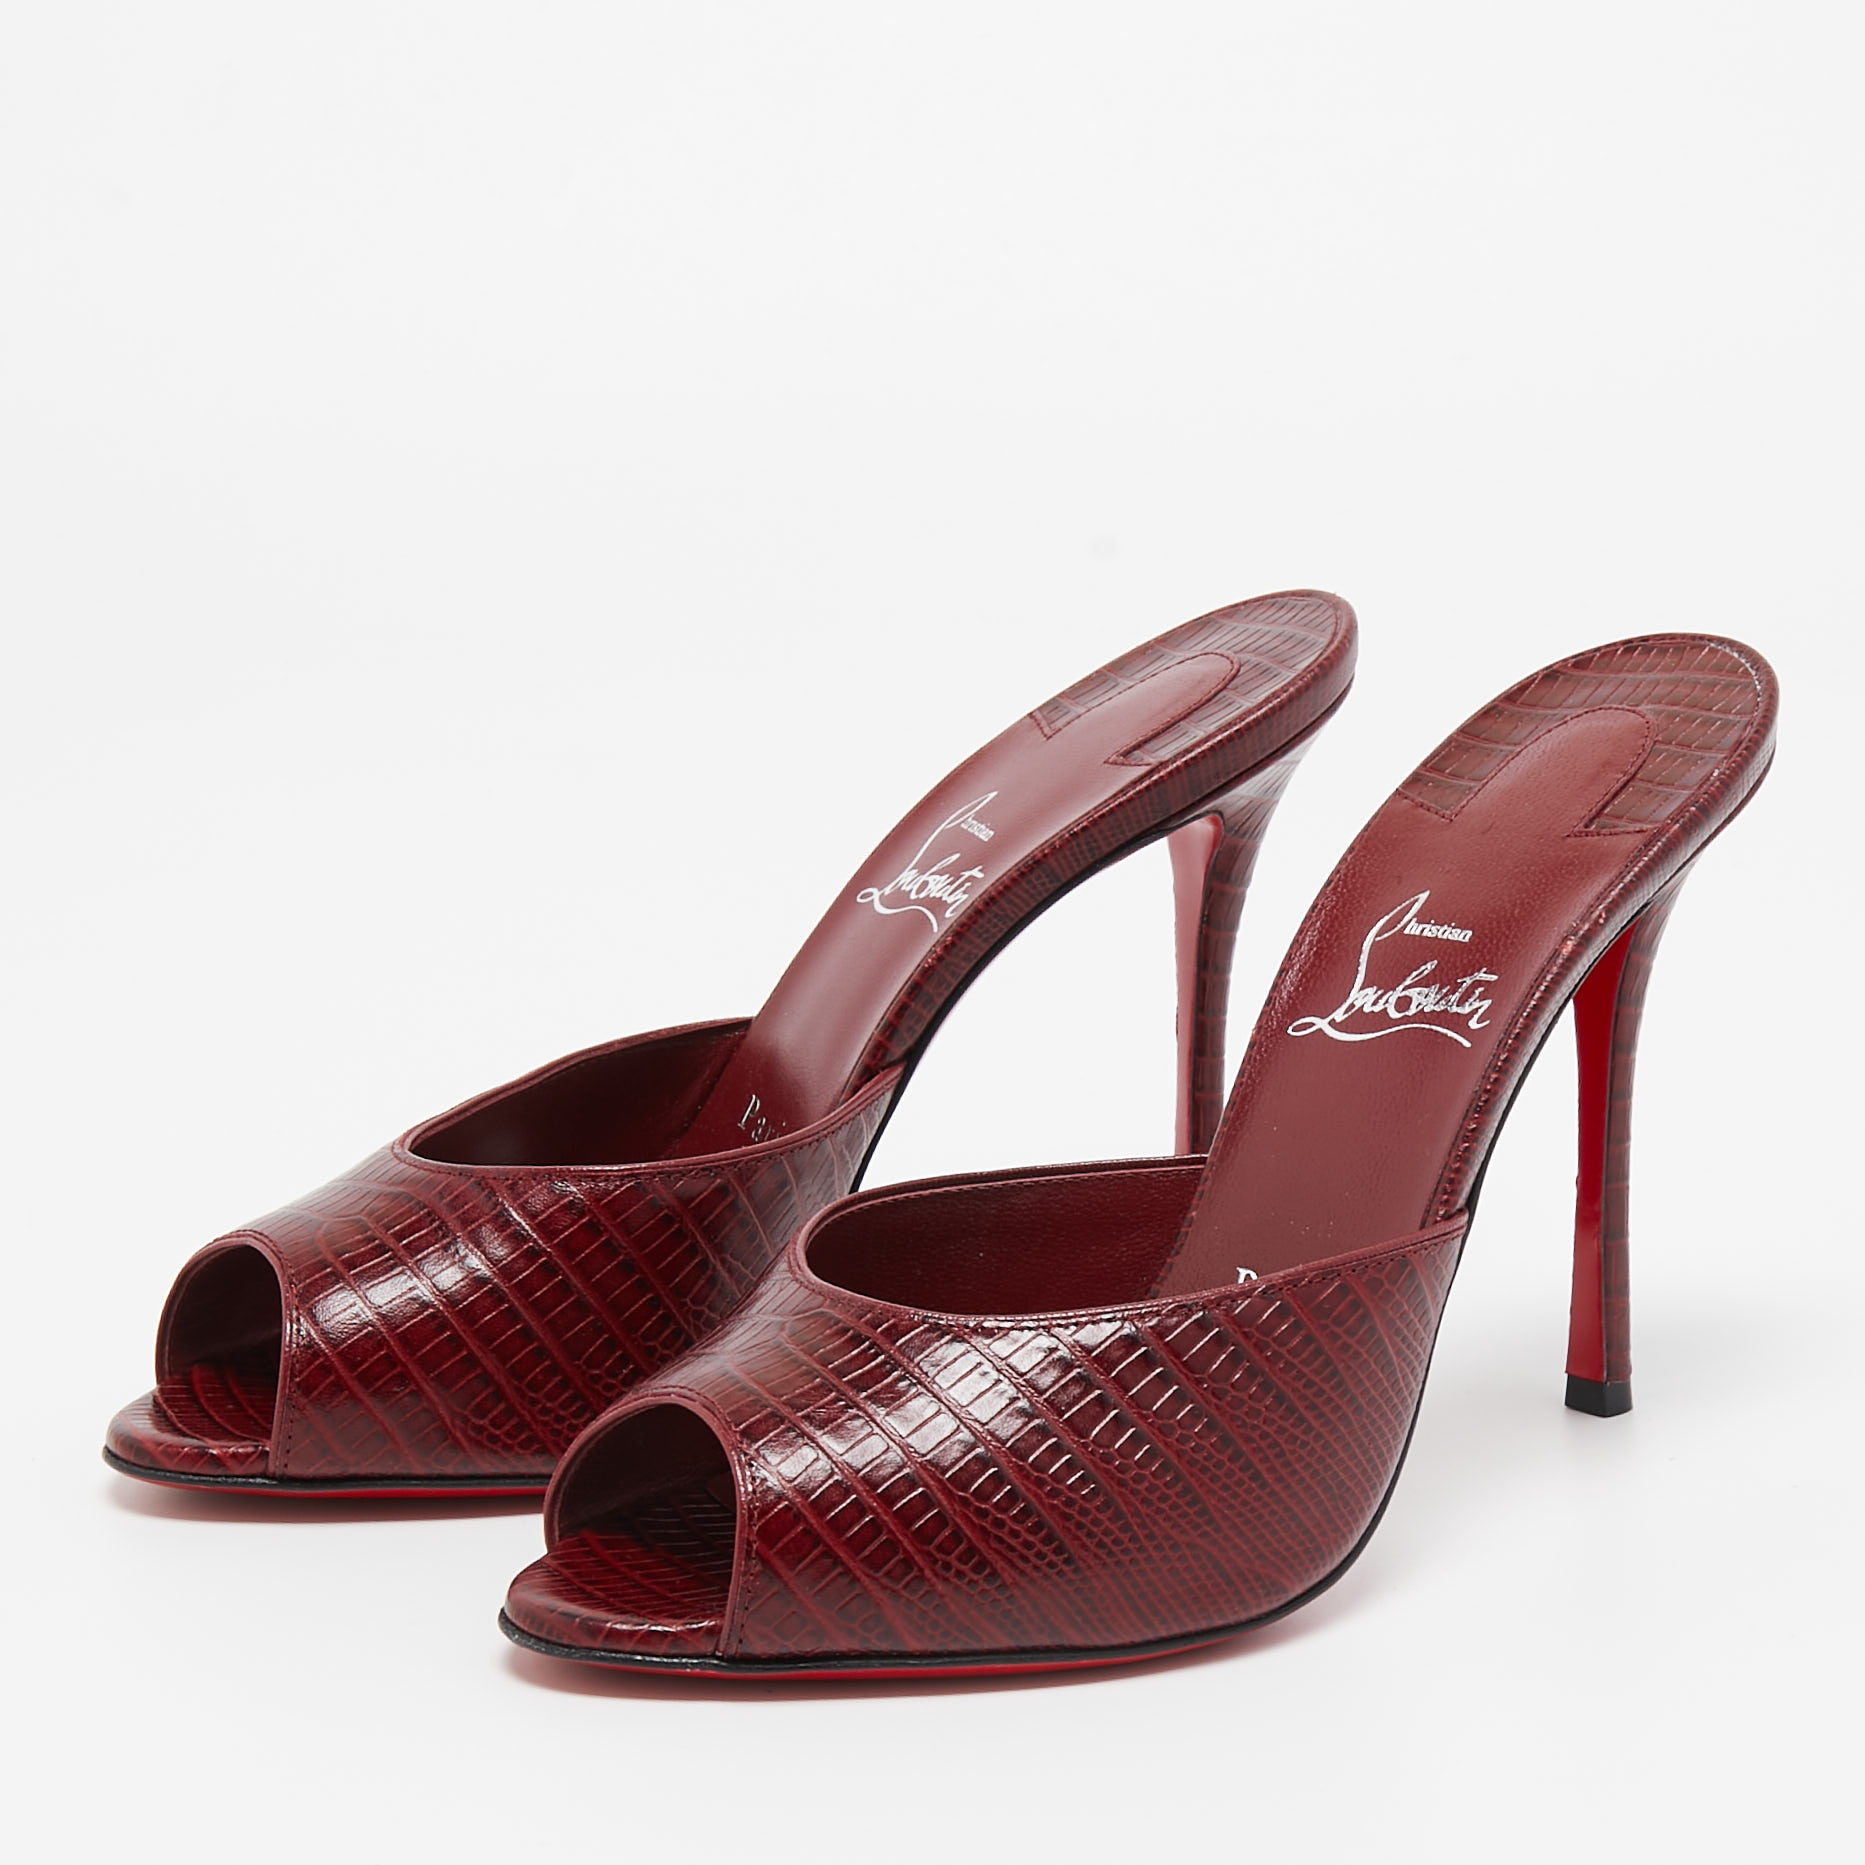 

Christian Louboutin Burgundy Lizard Embossed Leather Me Dolly Slide Sandals Size